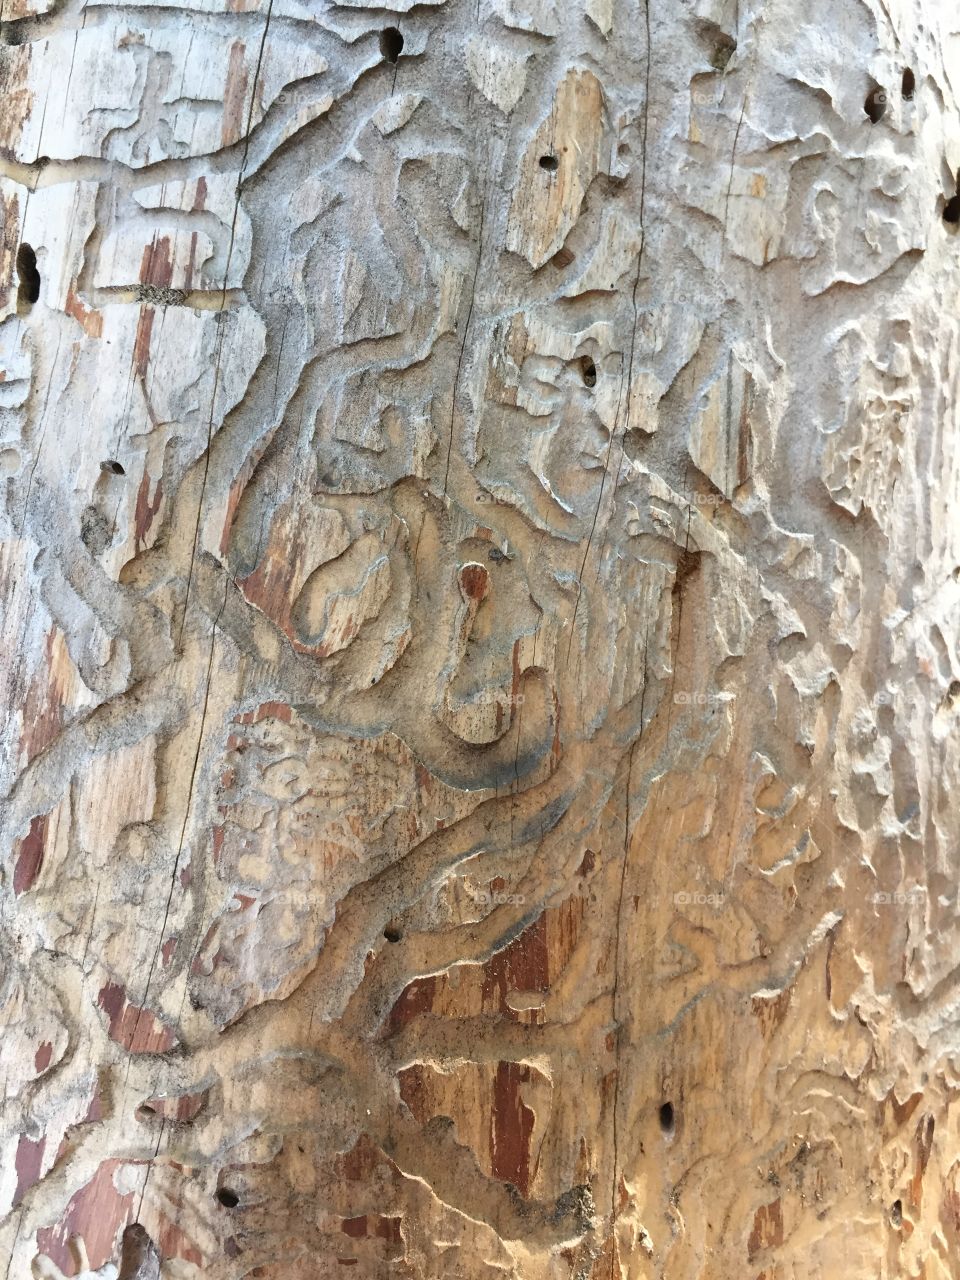 bark beetle causes great harm to trees in the forest